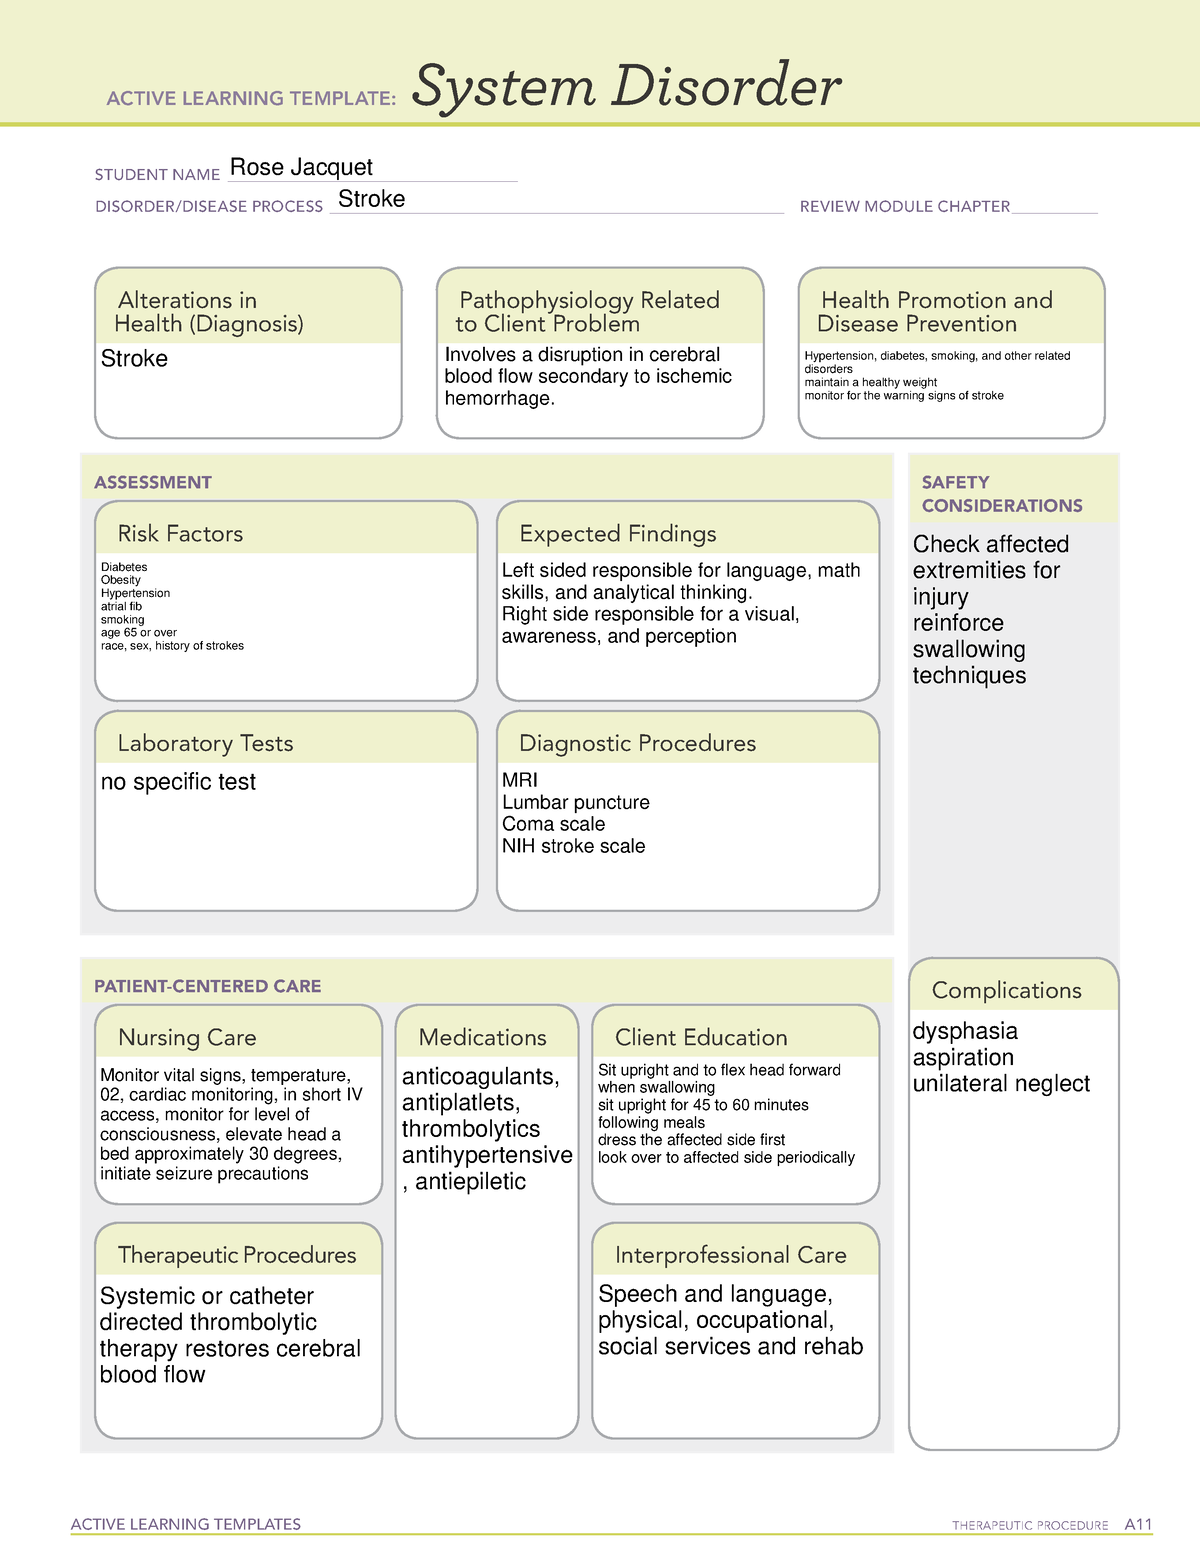 Active Learning Template sys Dis stroke ACTIVE LEARNING TEMPLATES